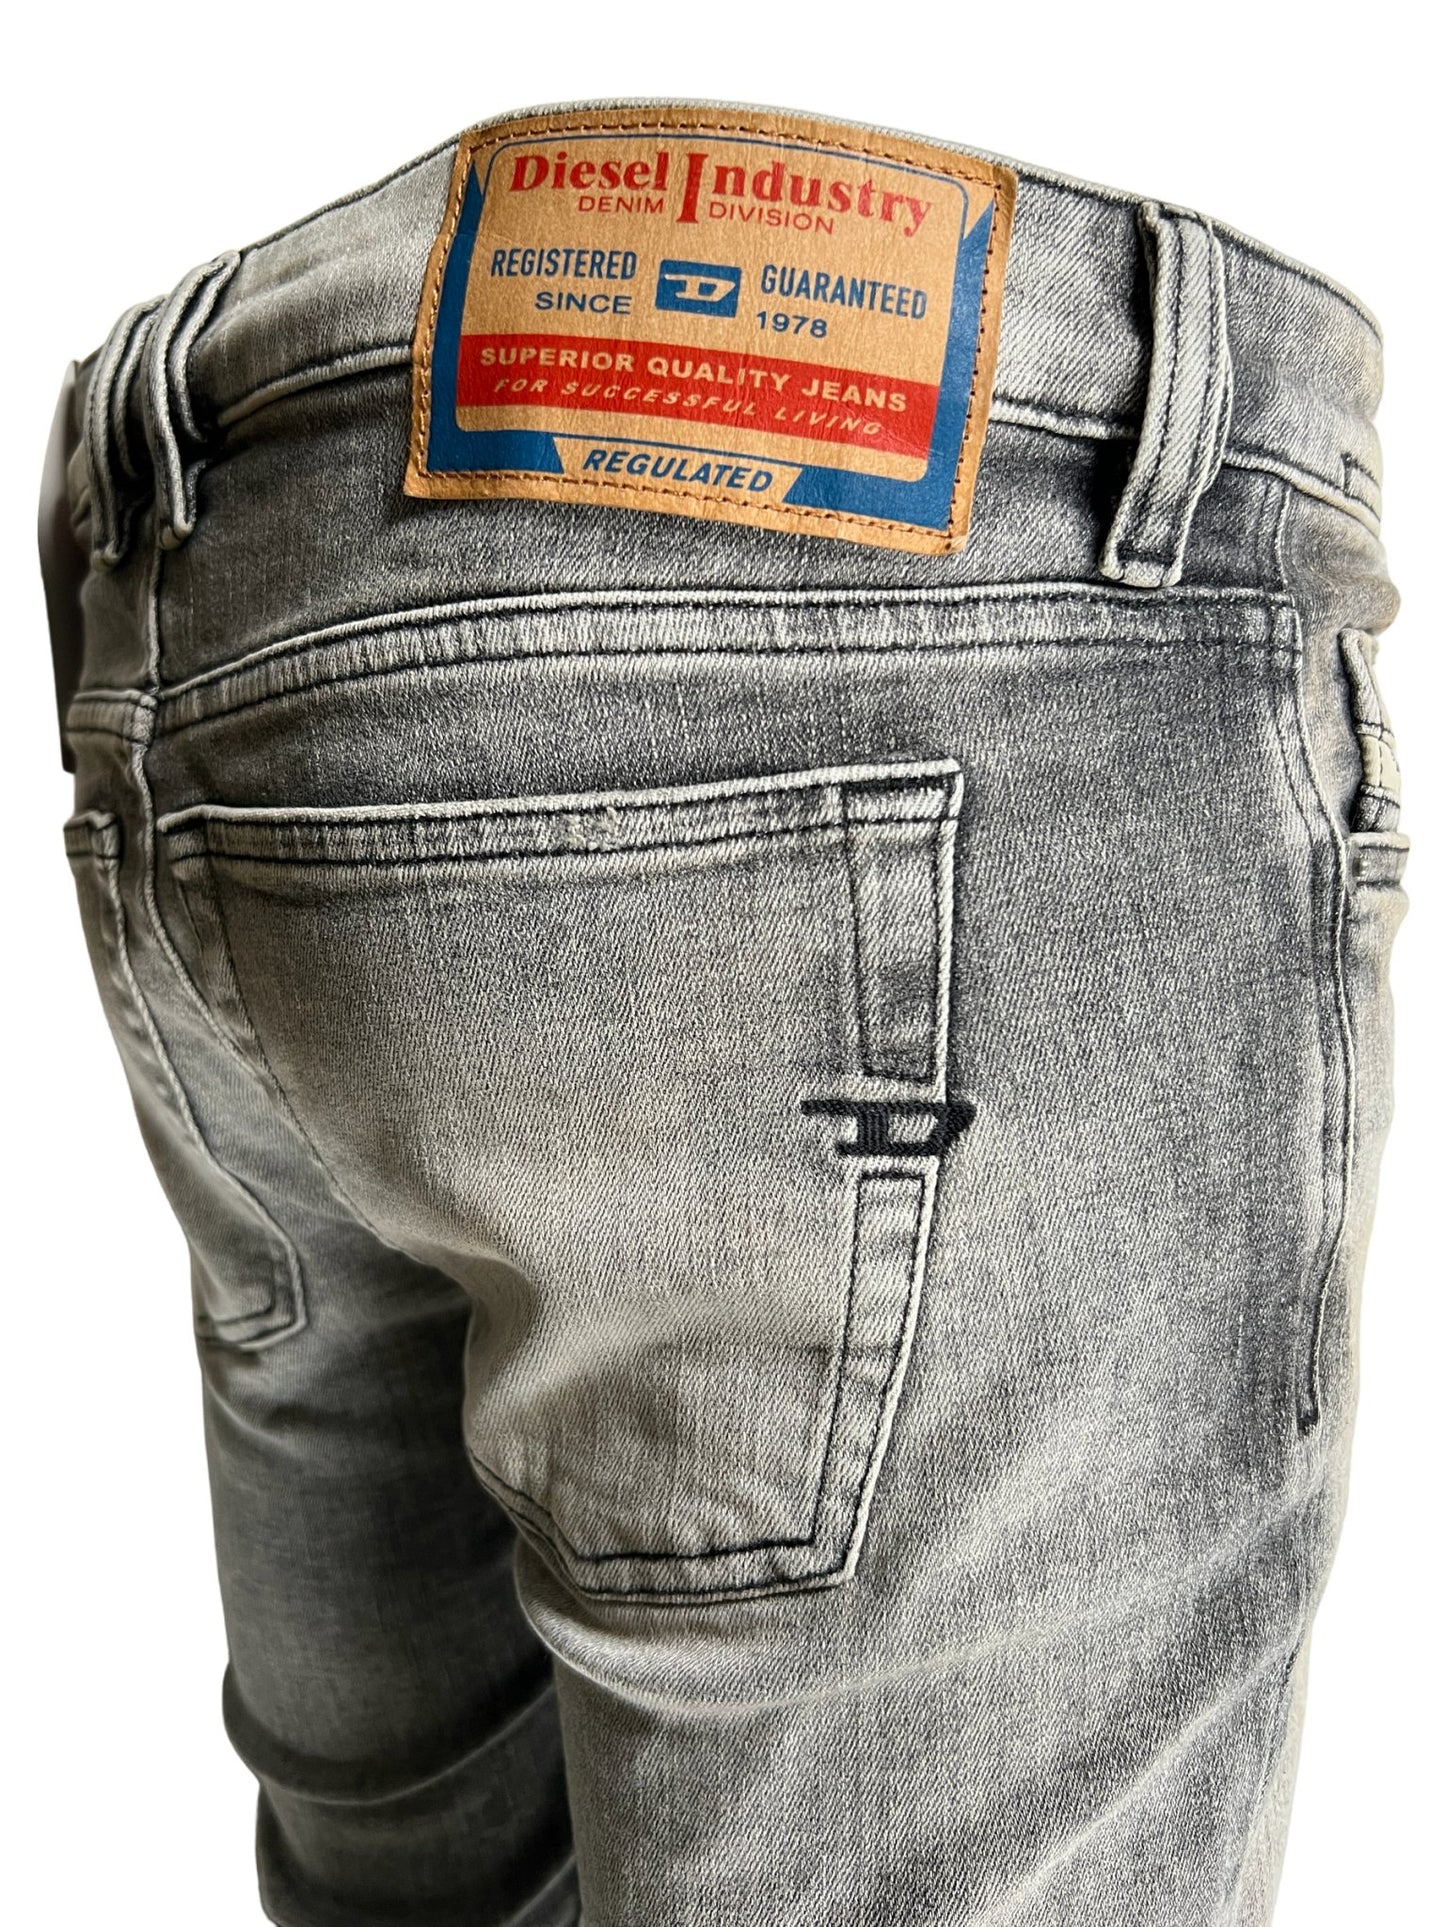 Close-up of the back of a pair of DIESEL brand skinny jeans showing the label and pocket detail.